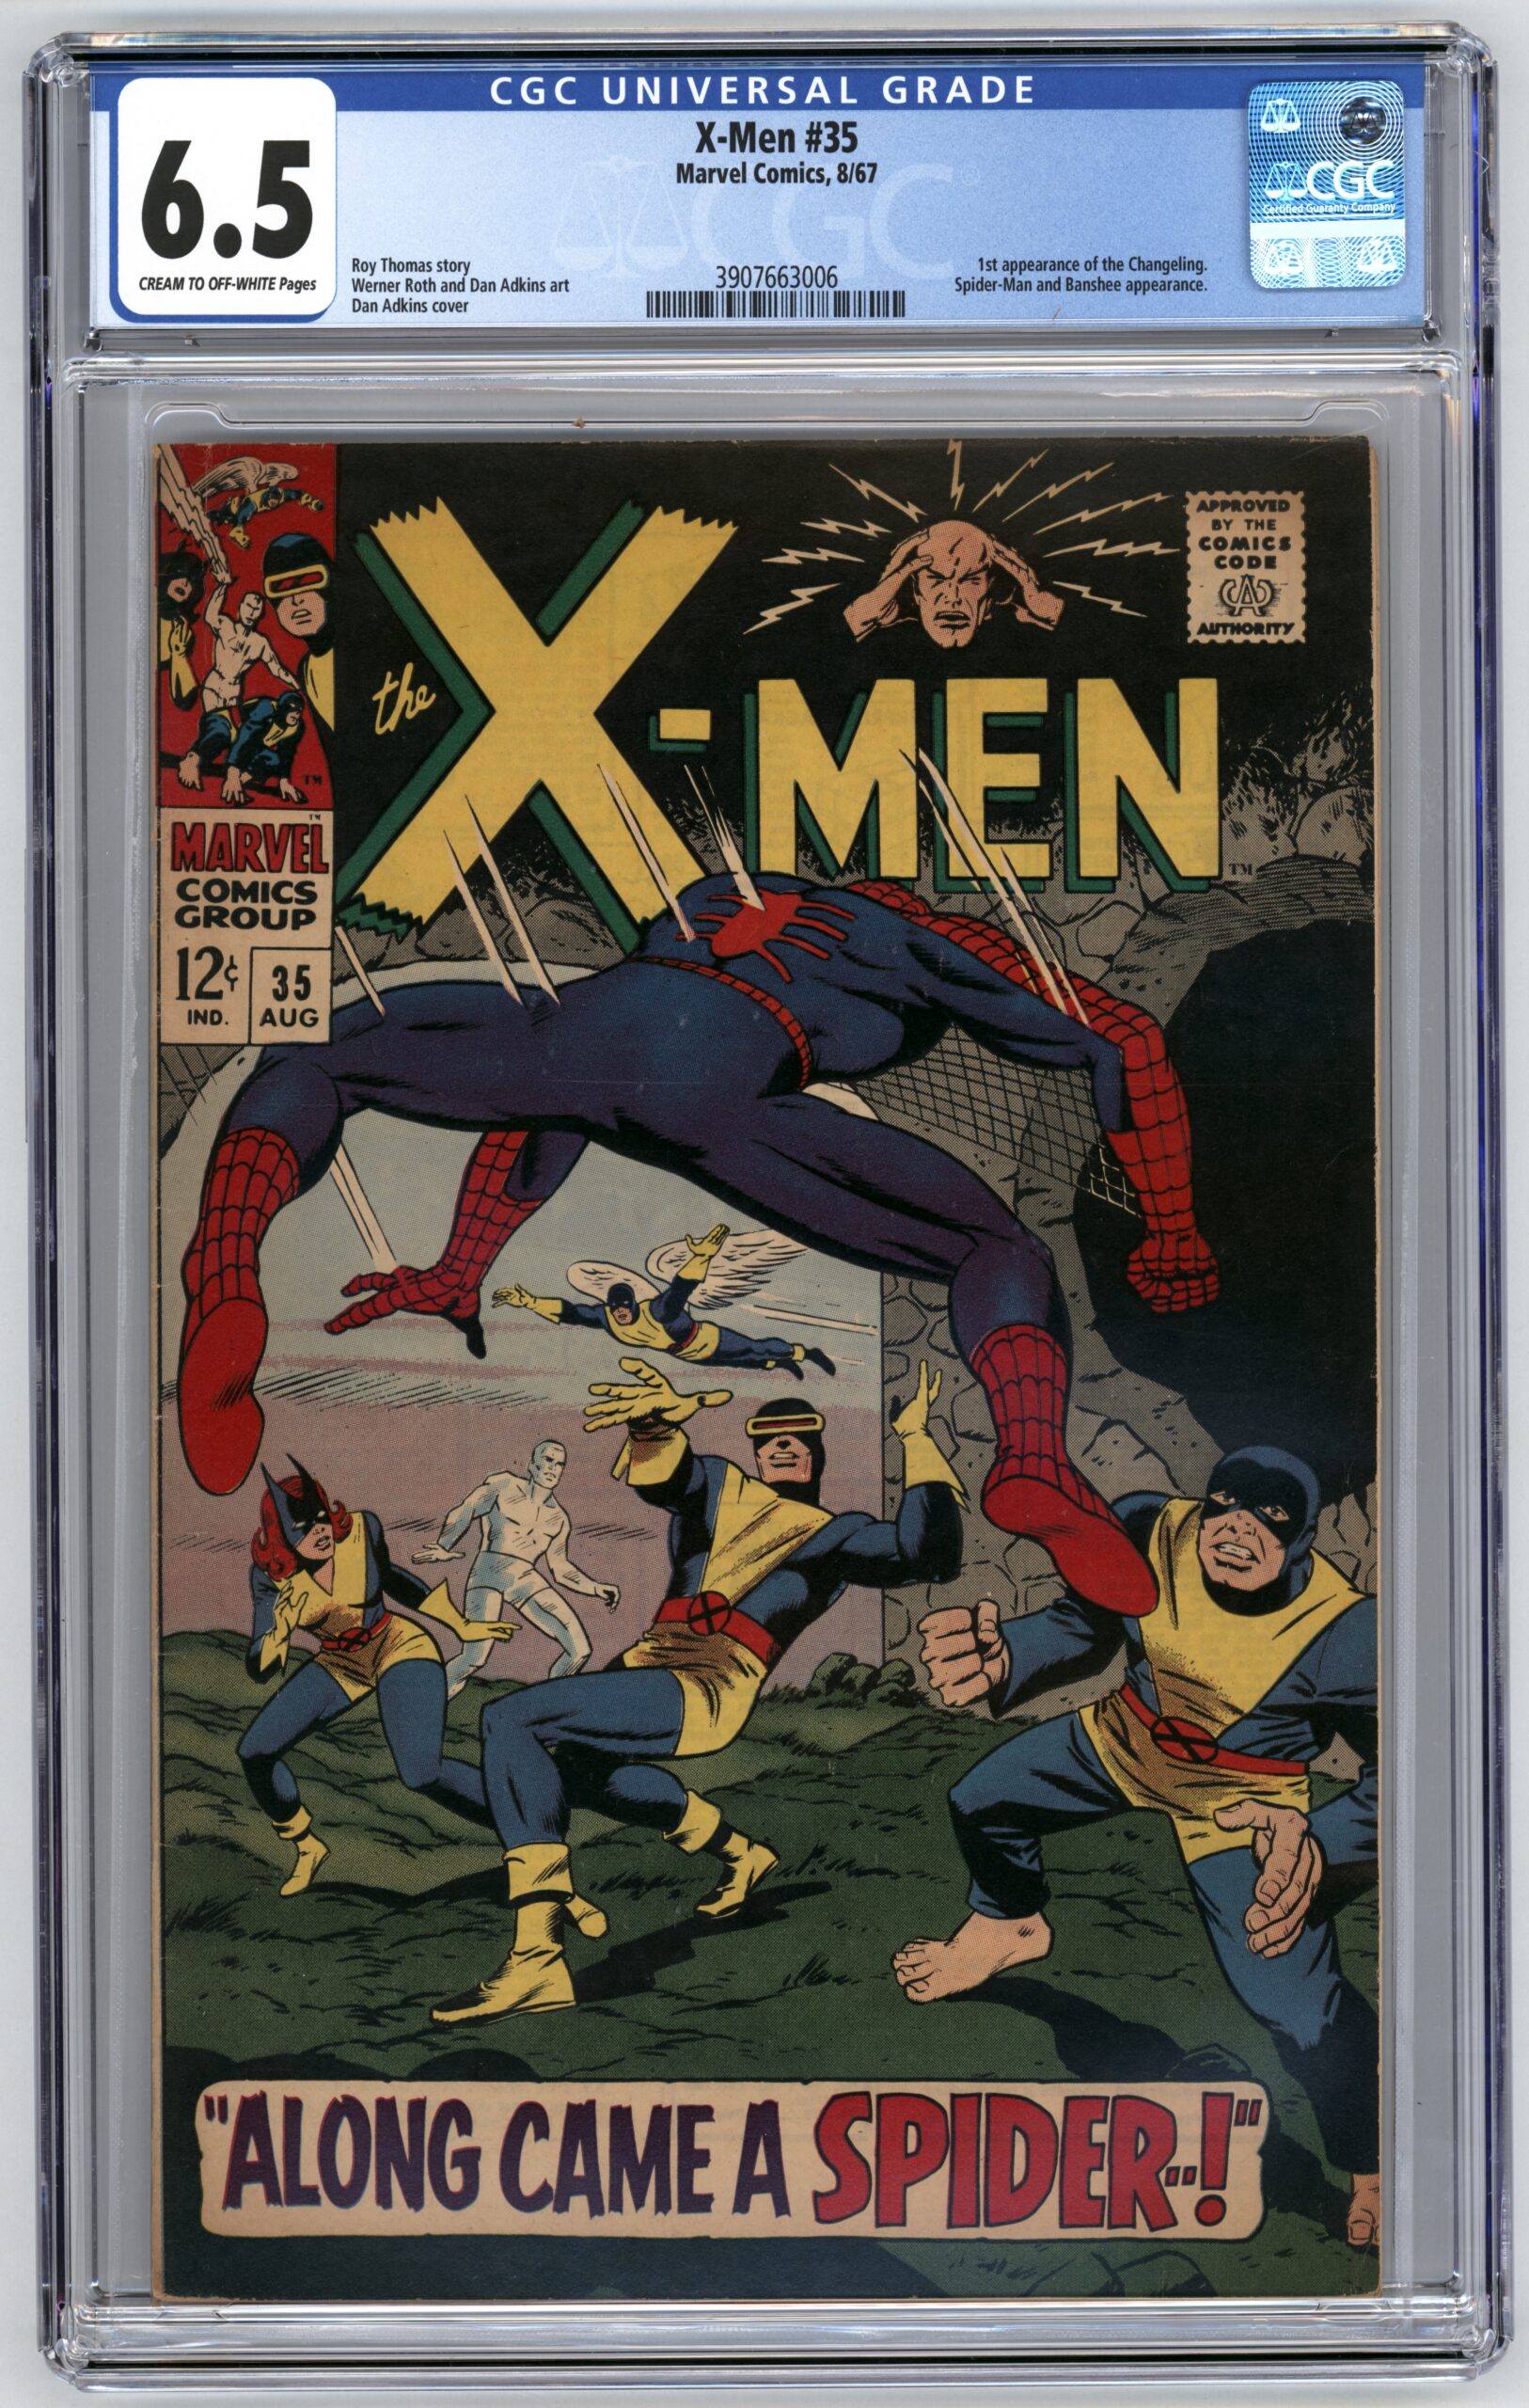 X-Men #35 CGC 6.5 1st appearance of Changeling - Android’s Amazing Comics